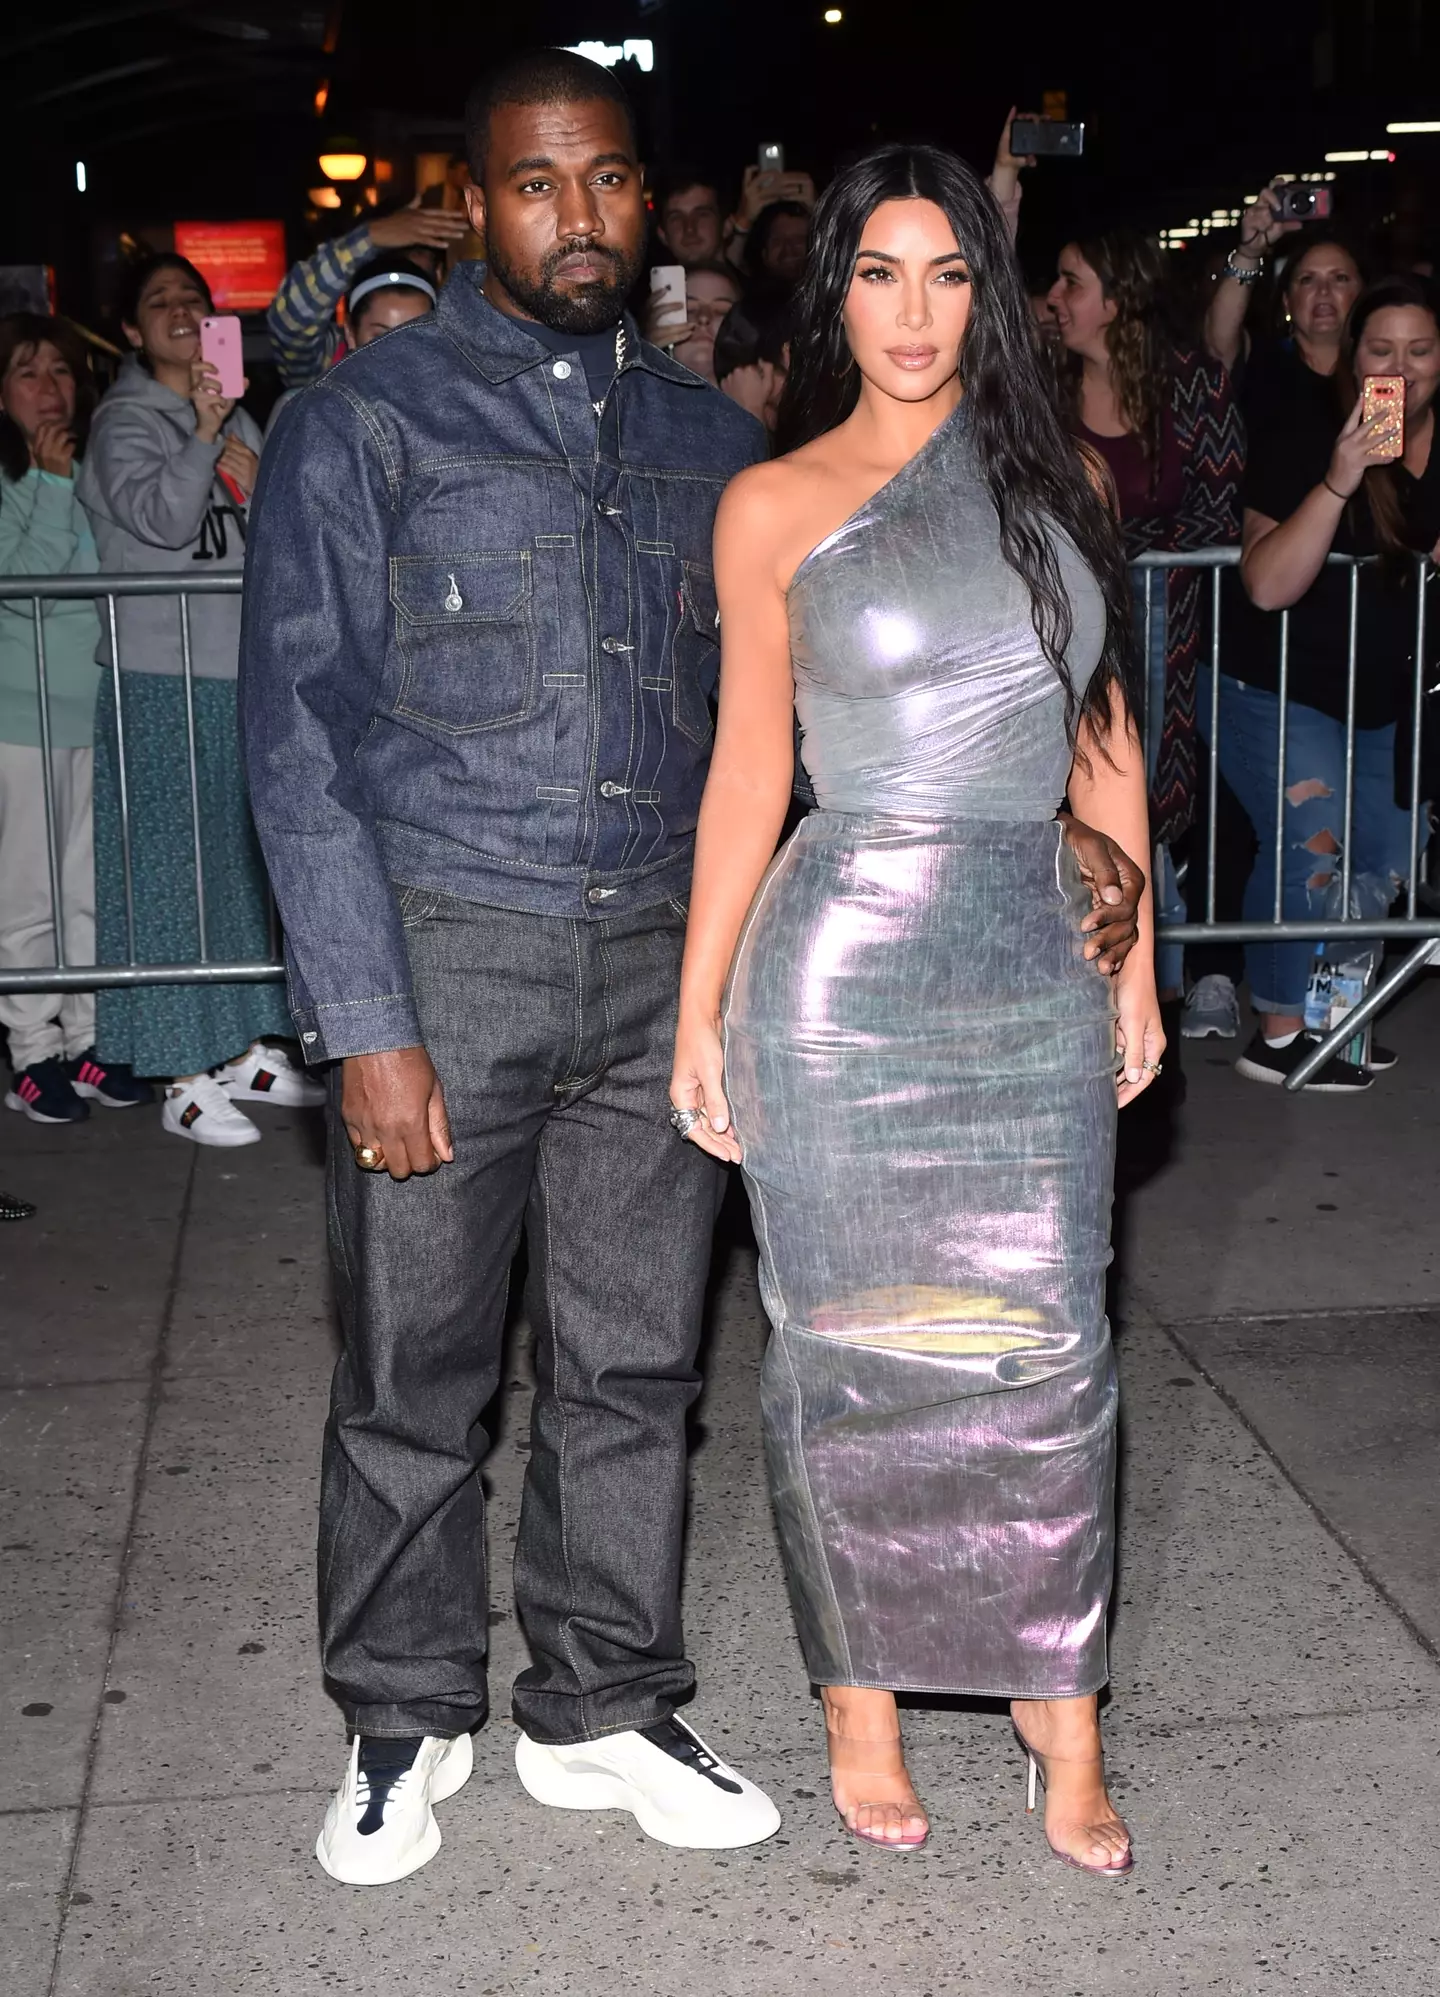 Kim went on to say that both she and Kanye "deserve the opportunity to build new lives" (